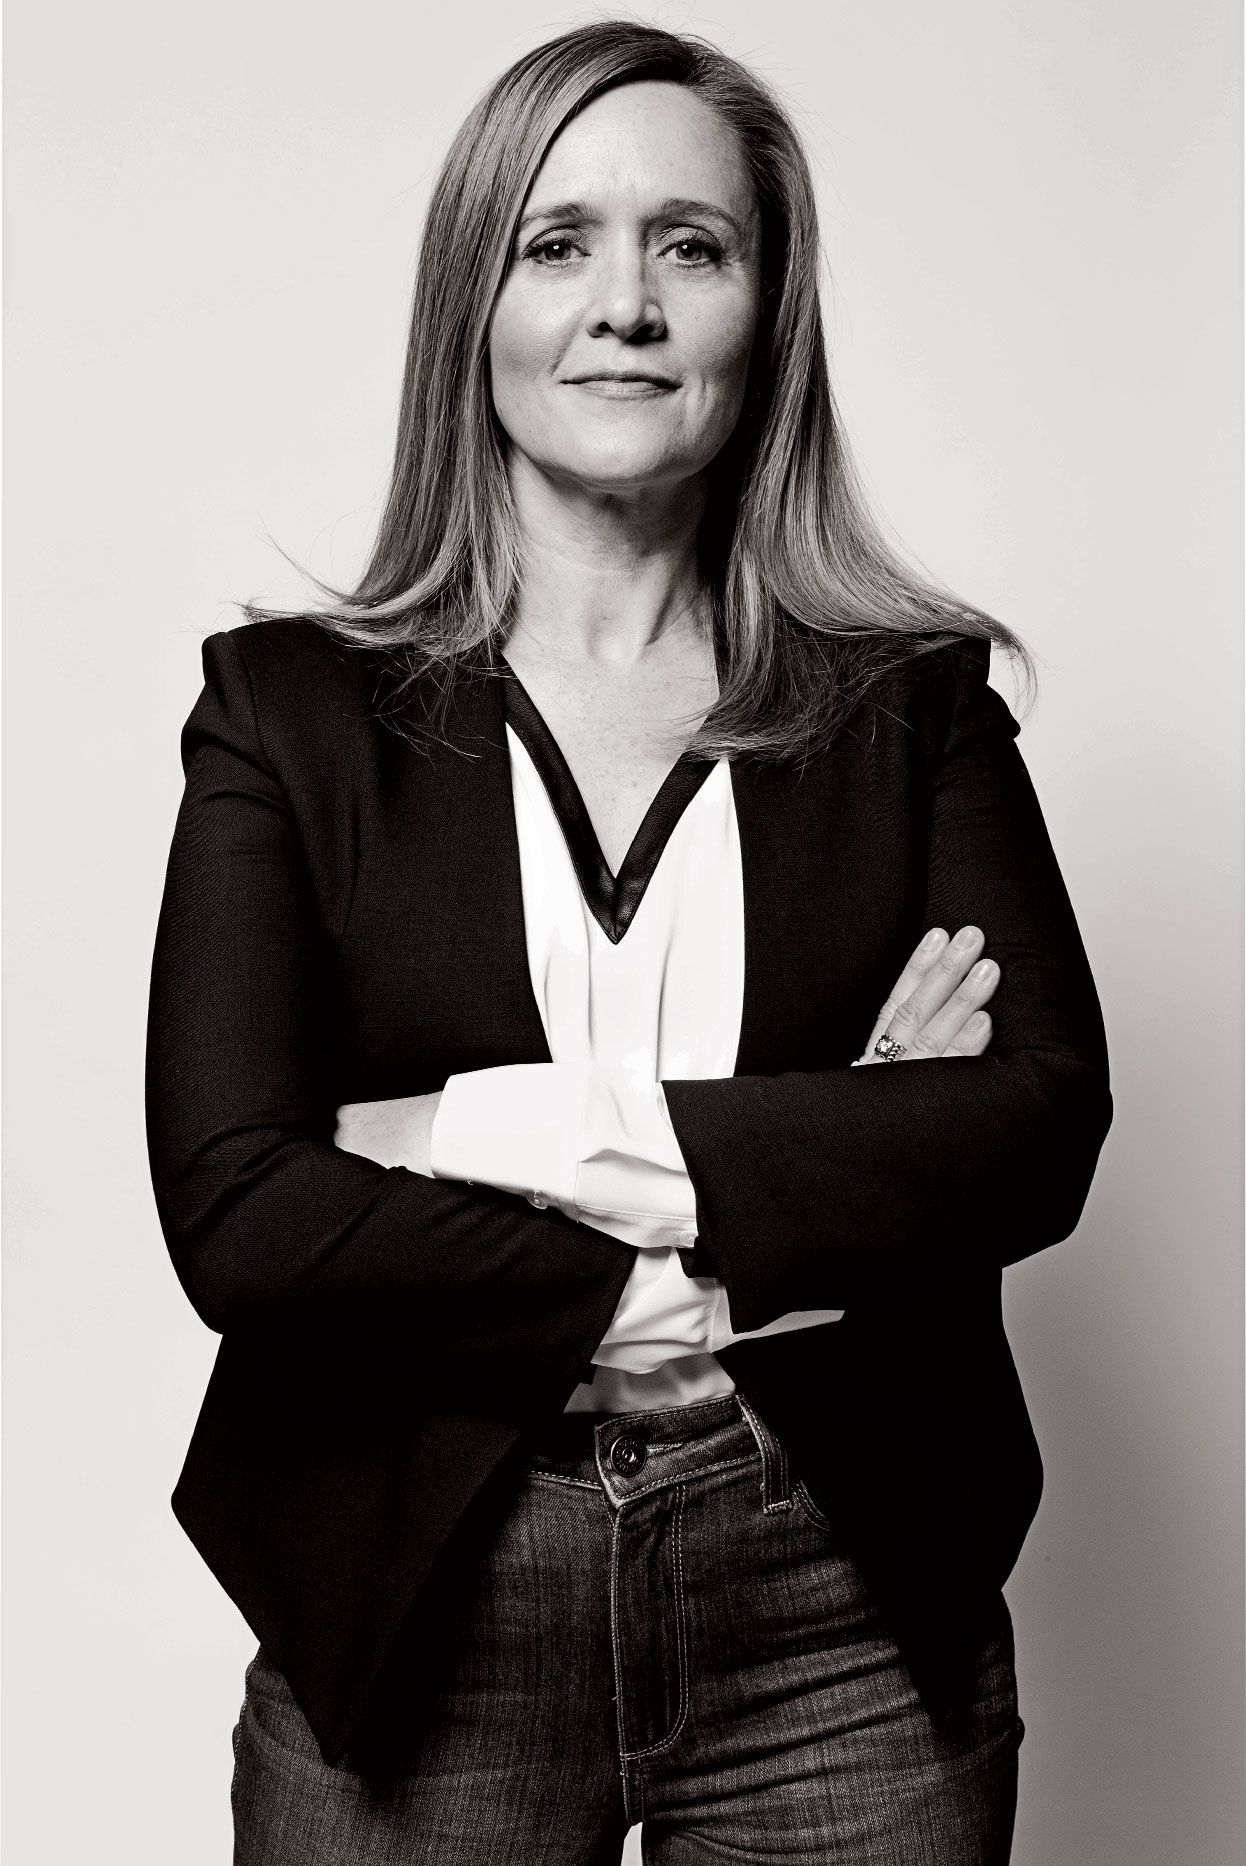 Images of samantha bee